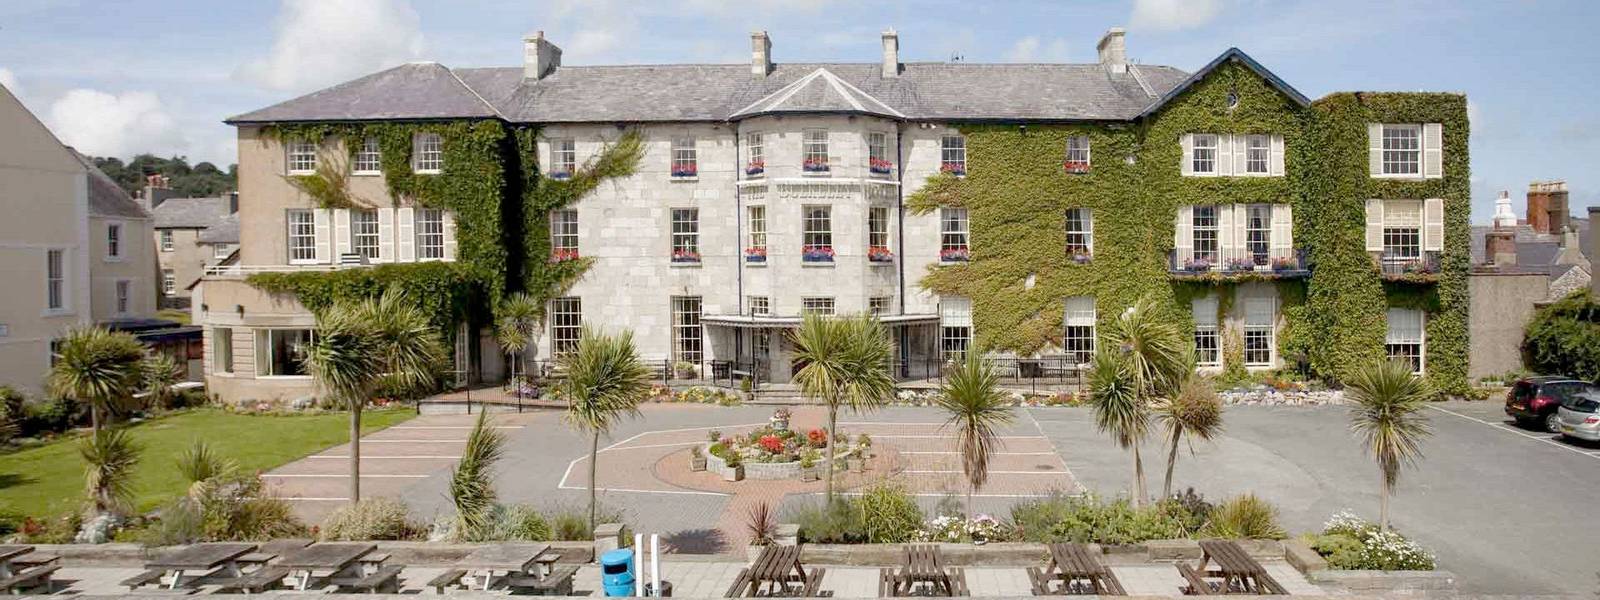 Anglesey - Wales - Guided Trail - Bulkeley Hotel exterior.jpg